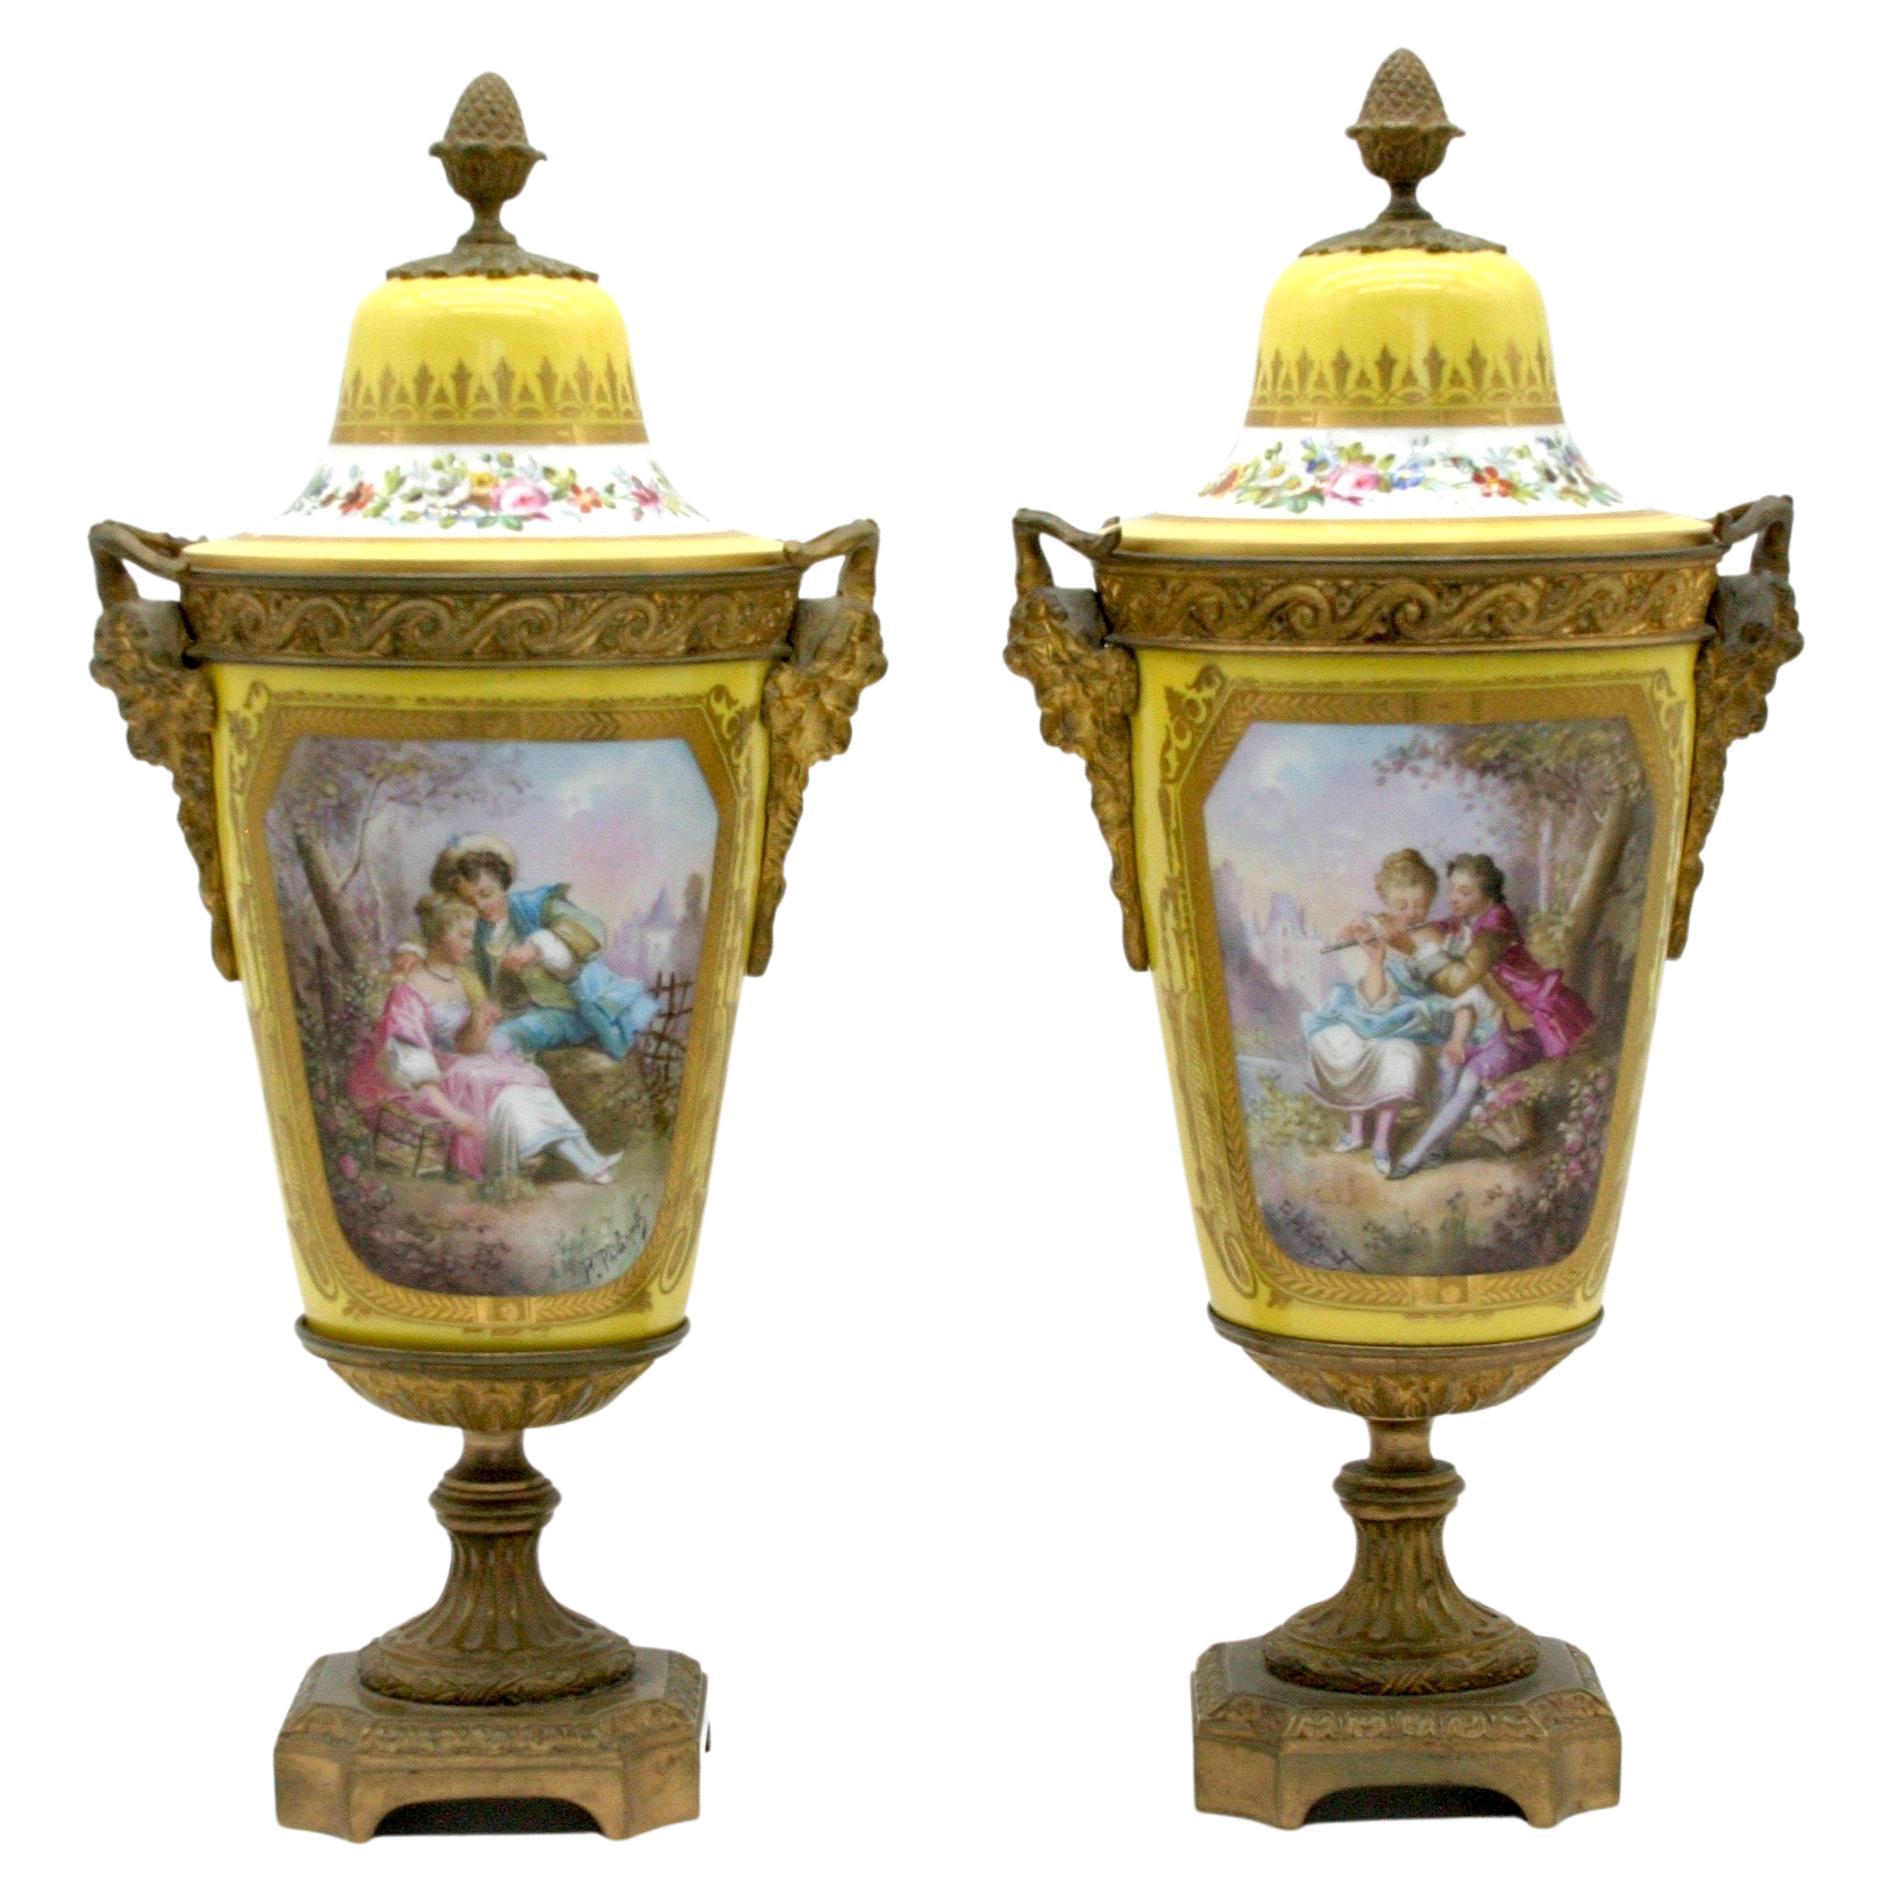 Bronze Mounted Porcelain Pair Covered Urns